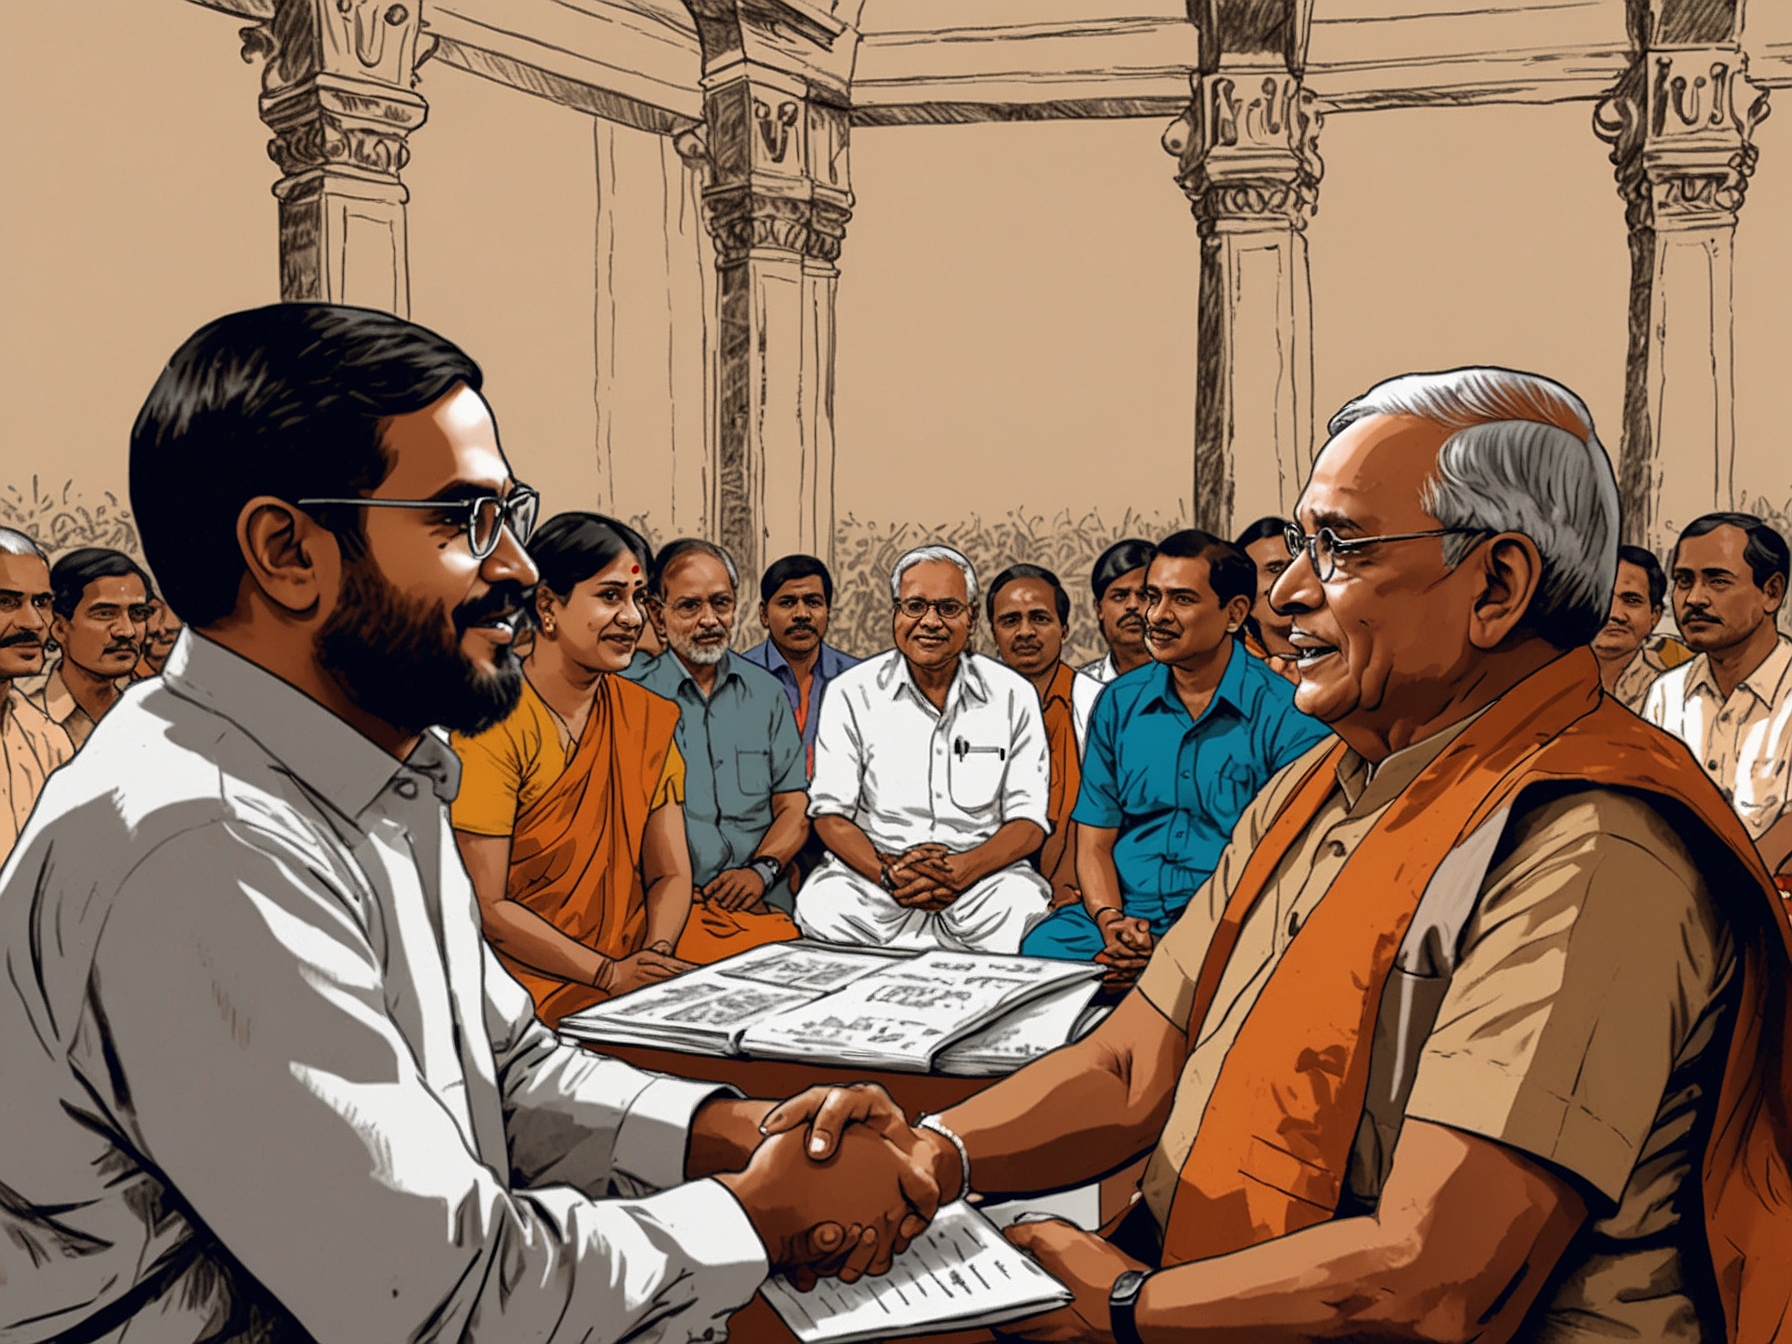 Young Syro-Malabar Christians engaged in discussions with BJP leaders, illustrating the generational divide and the economic aspirations driving some members to consider BJP despite communal concerns.